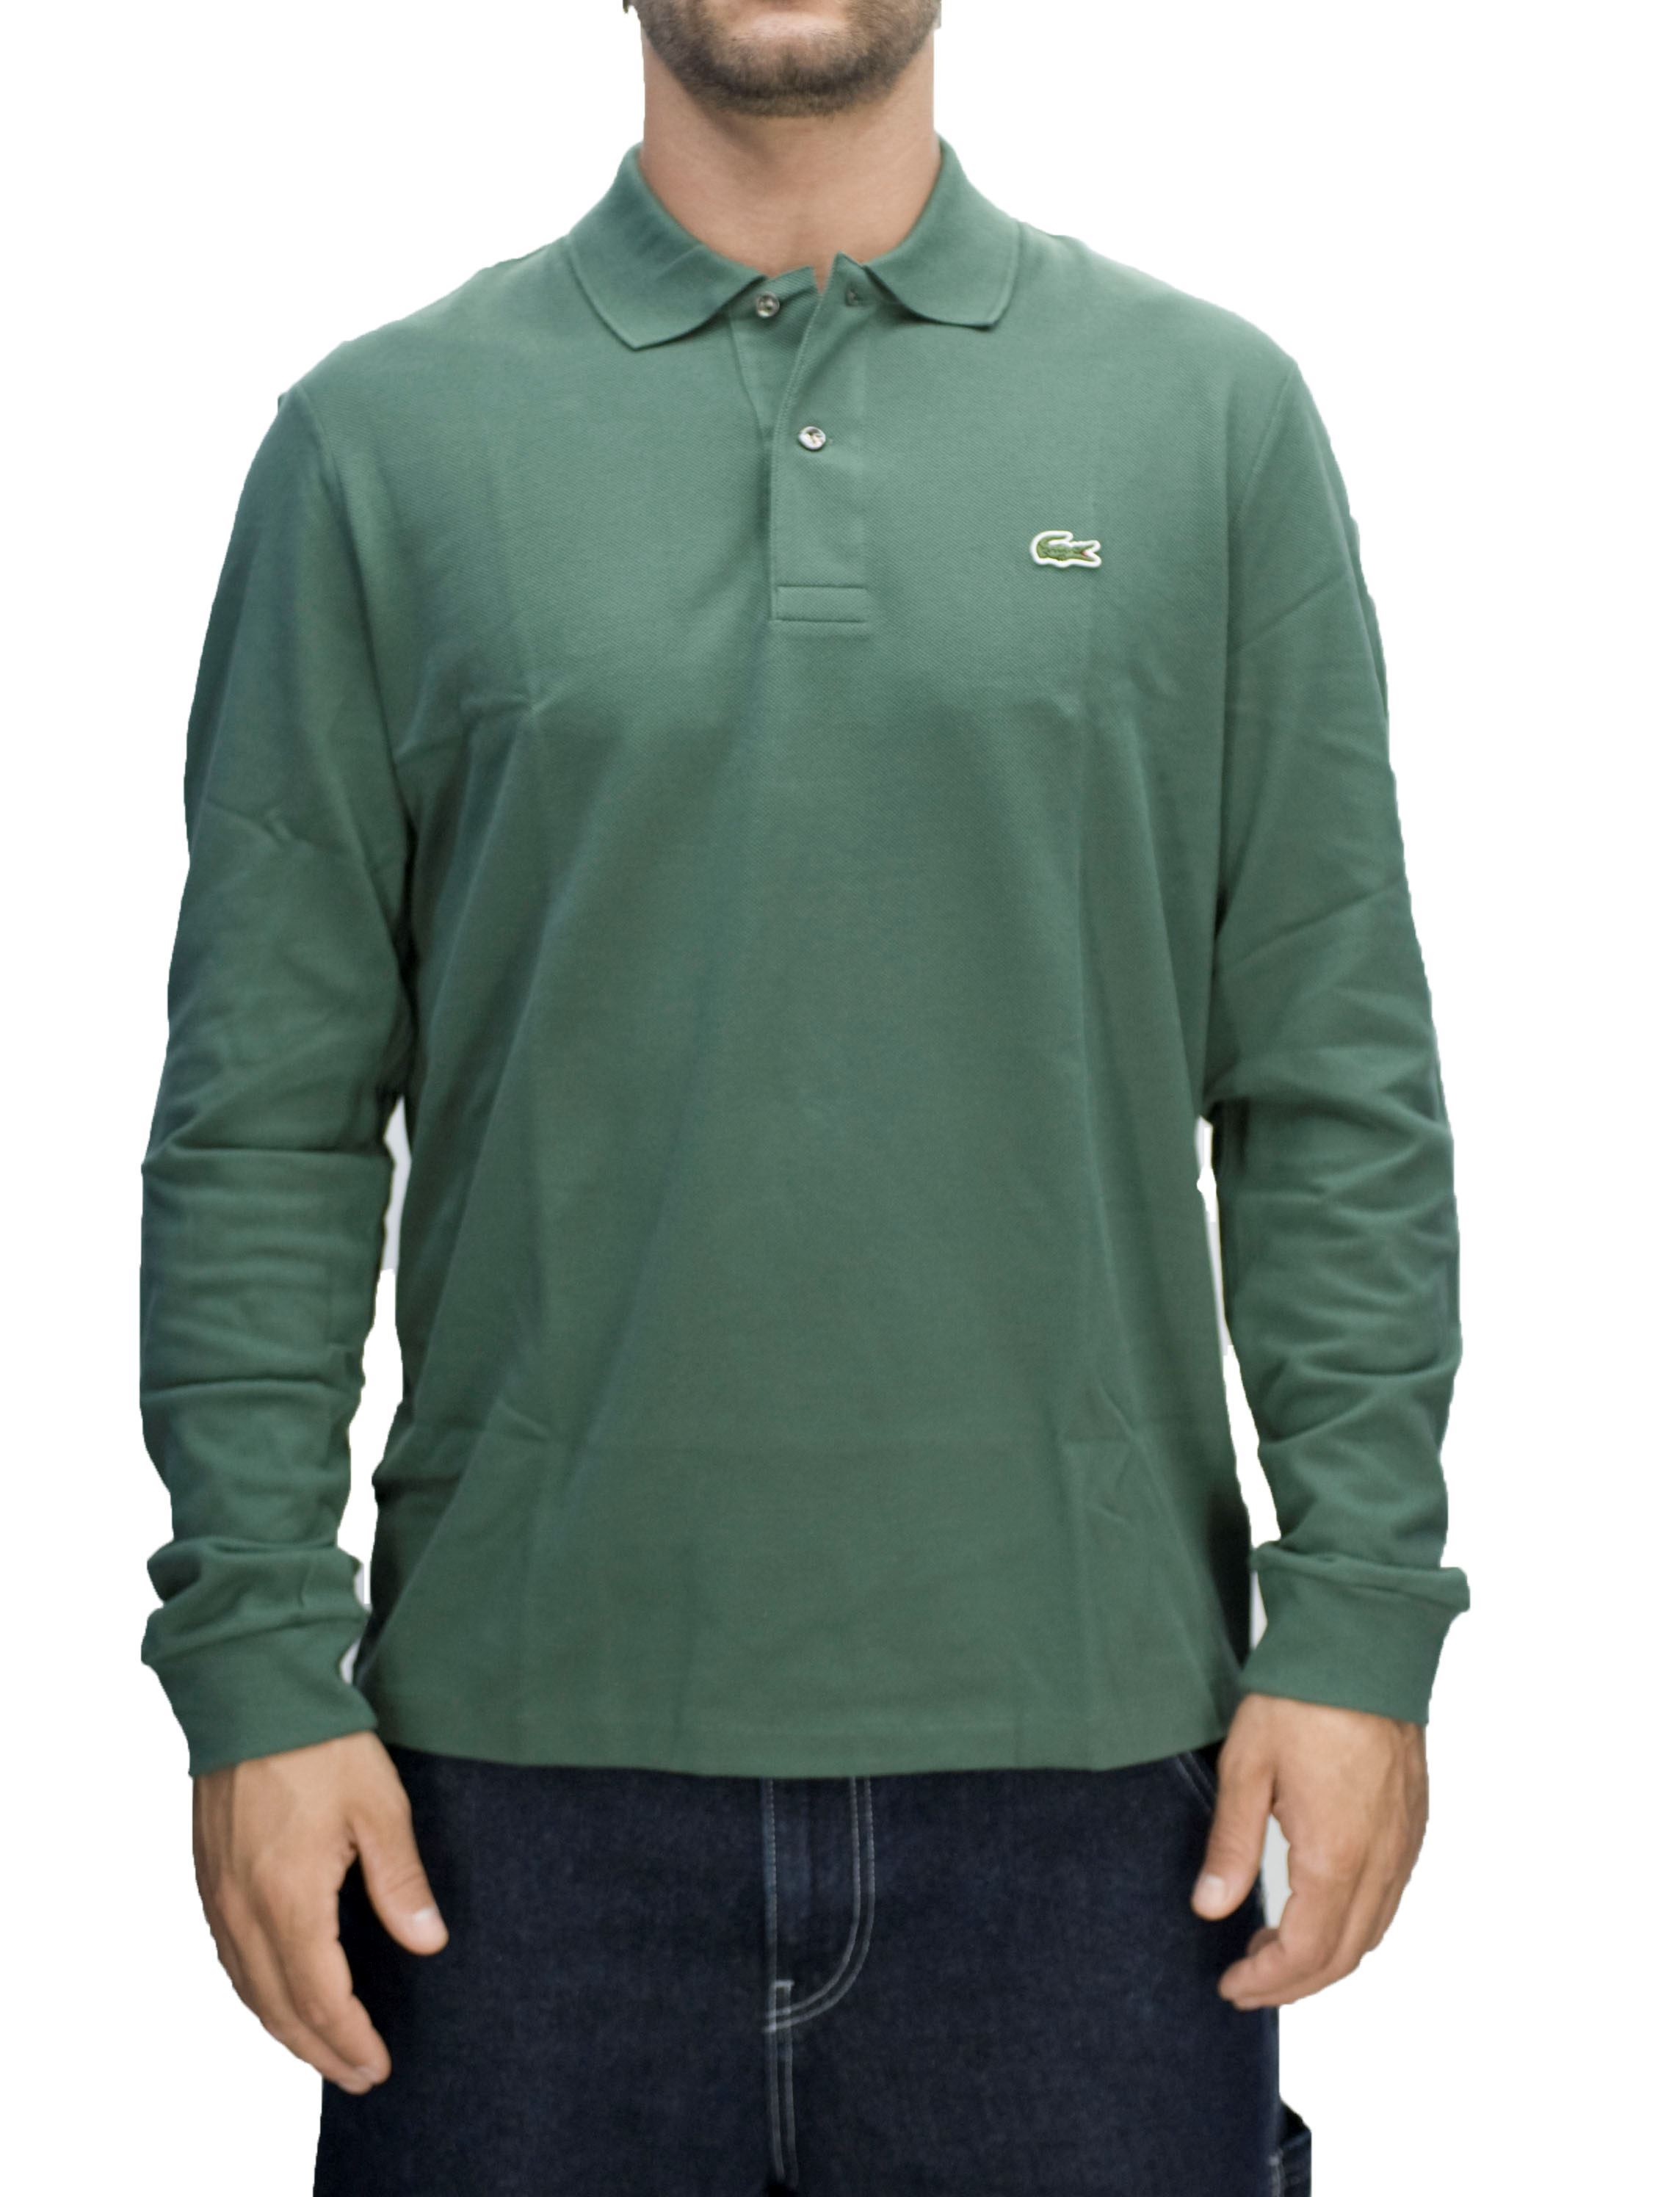 Picture of green long sleeve polo shirt